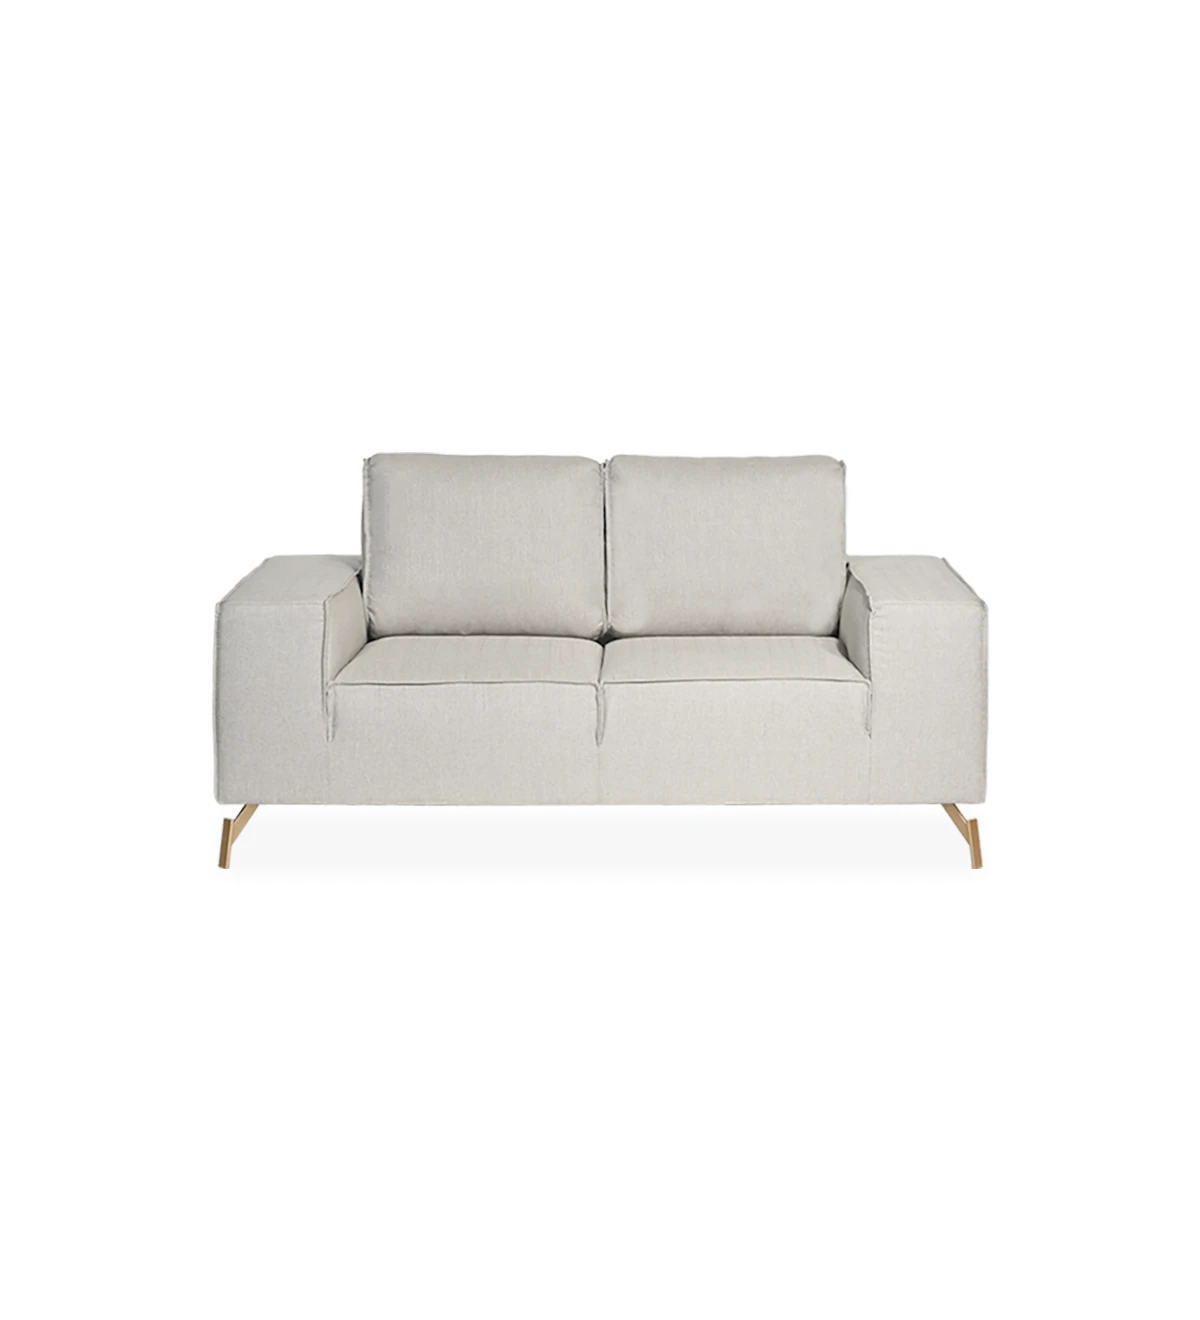 Tokyo 2-seater sofa upholstered in beige fabric, gold lacquered metal feet, 191 cm.